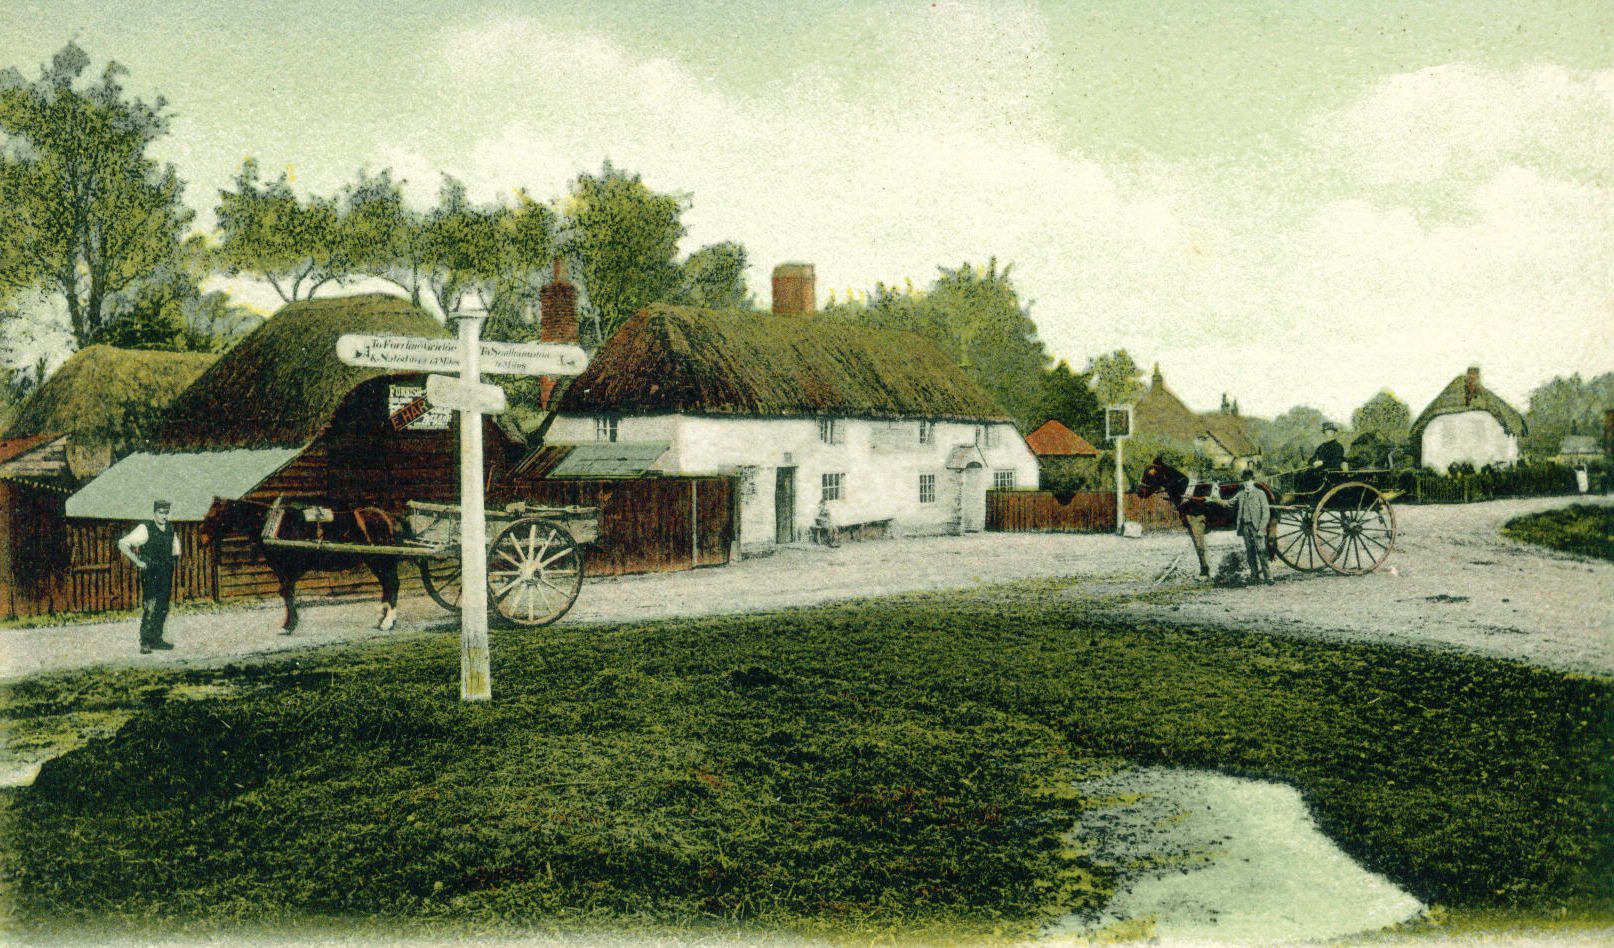 Cadnam in The New Forest from TheGenealogist's Image Archive